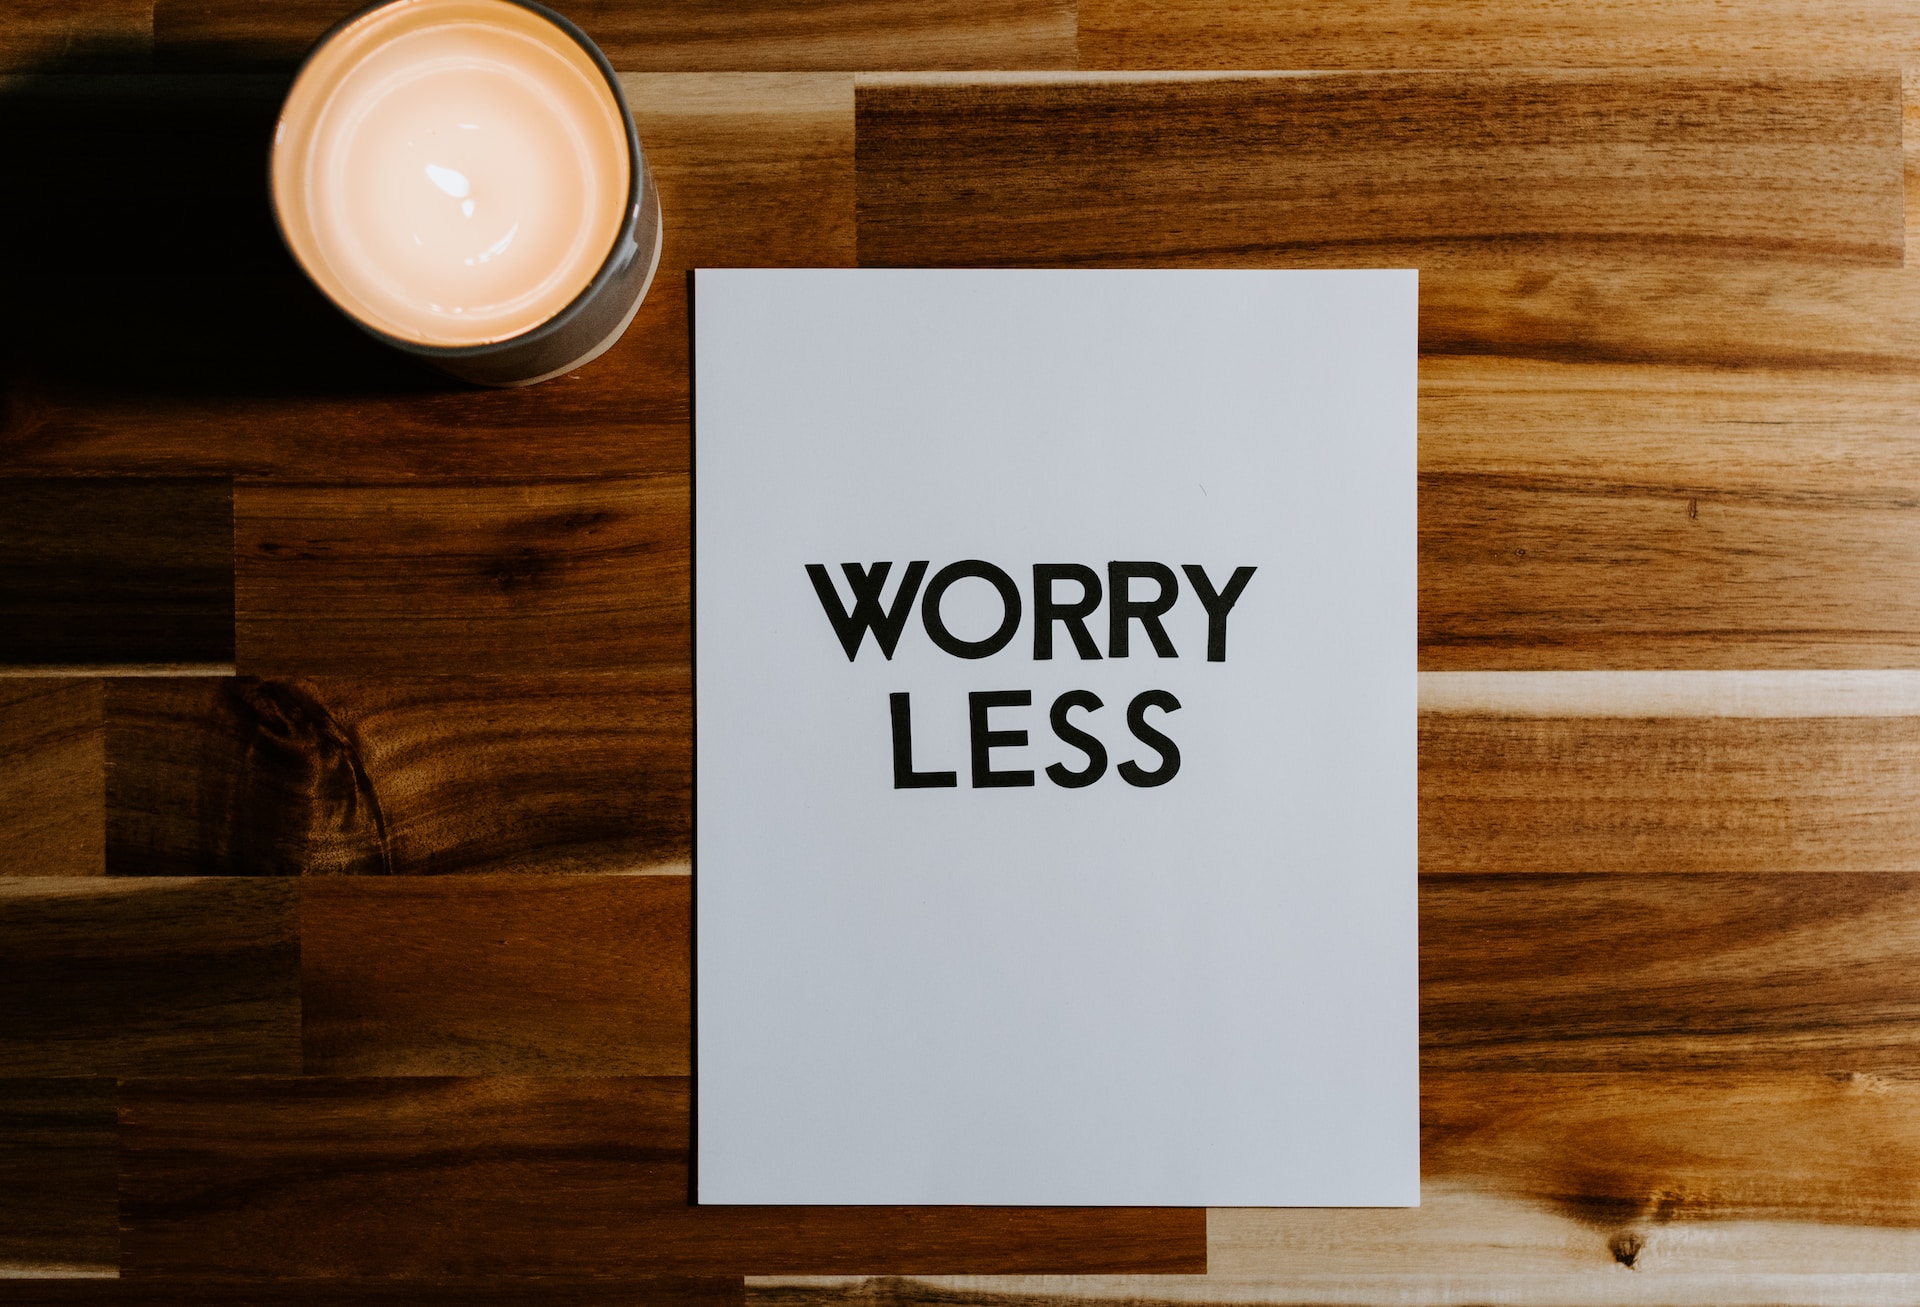 anxiety management, coping with worry, overcoming fear, mental health strategies, stress relief techniques, anxiety tips, fear management, worry coping strategies